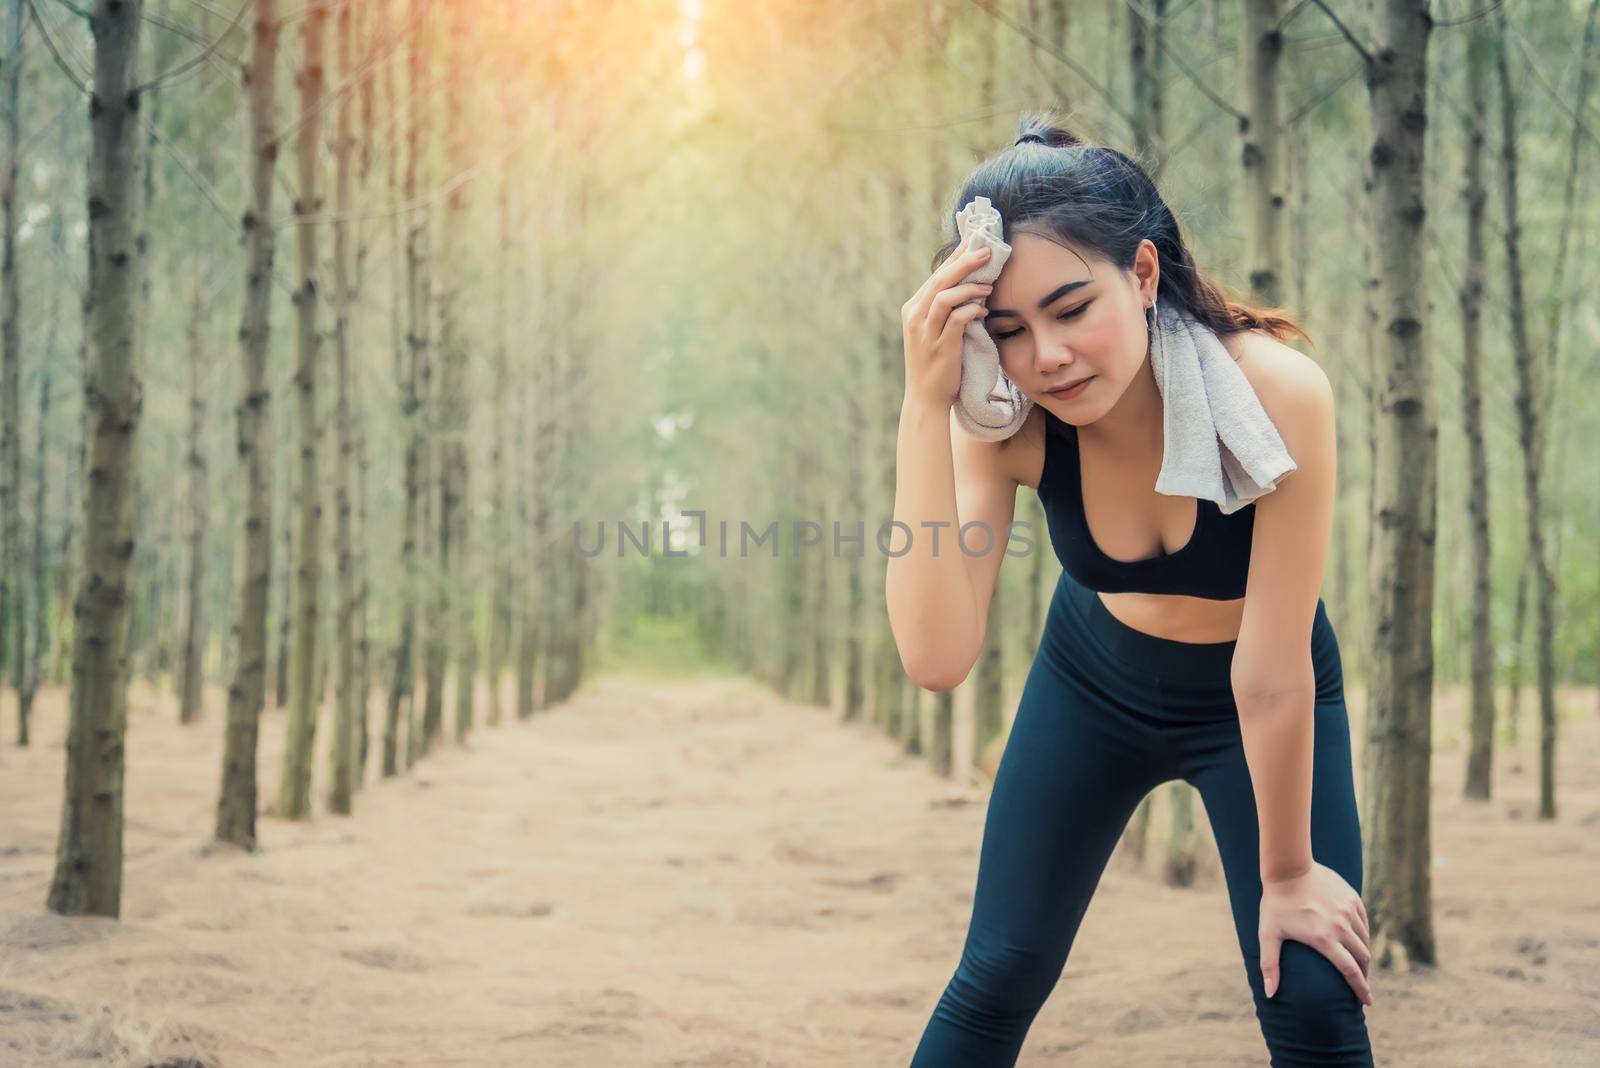 Asian beauty woman wiping the sweat in forest. Towel and sweat elements. Sport and Healthy concept. Jogging and Running concept. Relax and take a break theme. Outdoors activity theme.